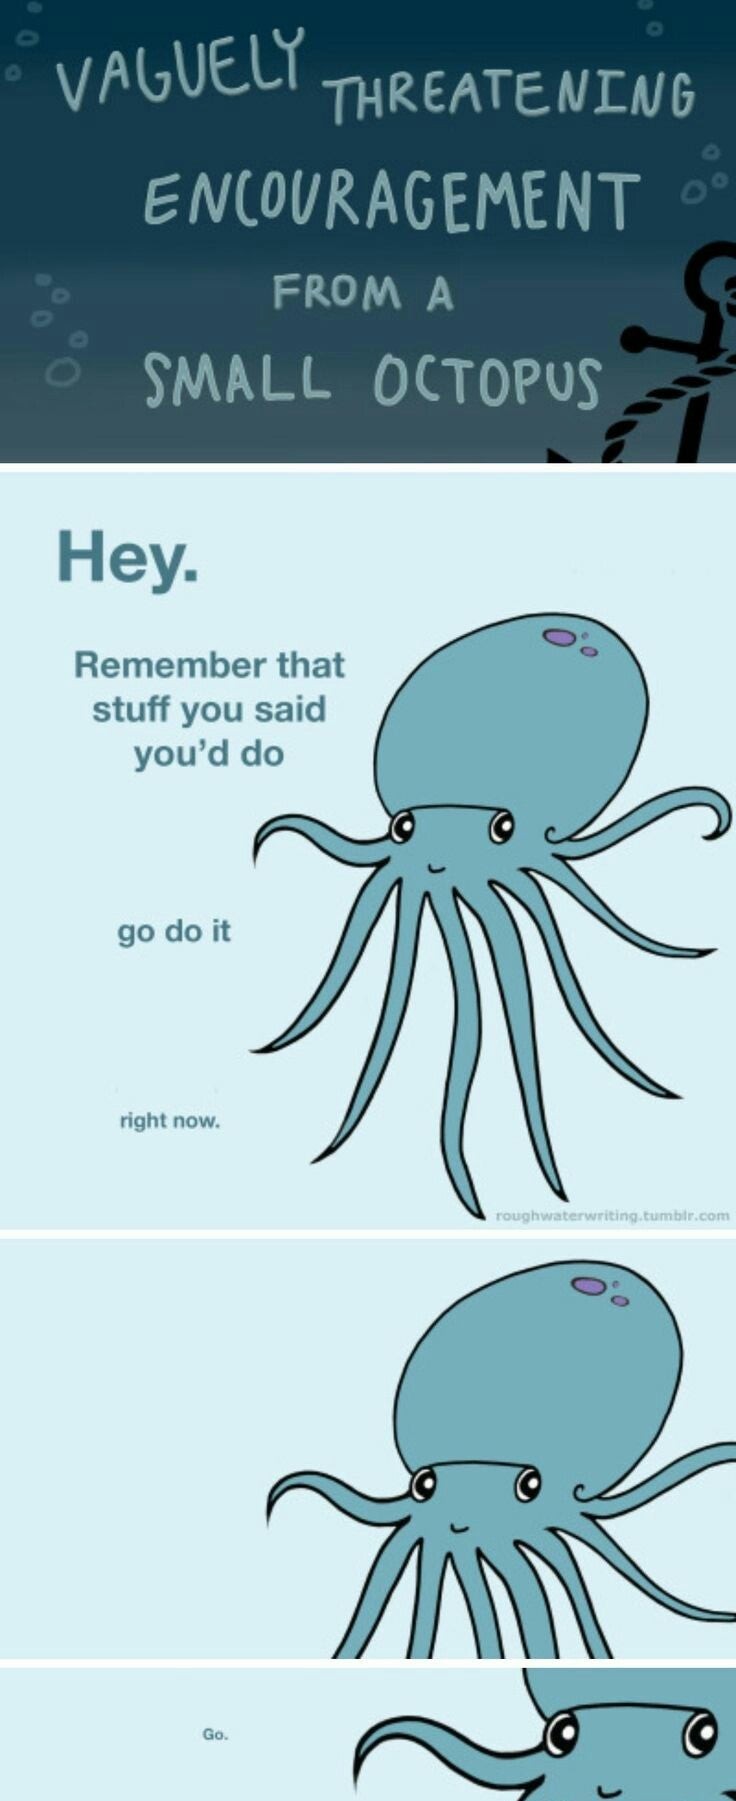 vaguely threatening encouragement from a small octopus - Vaguely Threatening Encouragement From A Small Octopus Hey. Remember that stuff you said you'd do go do it right now.